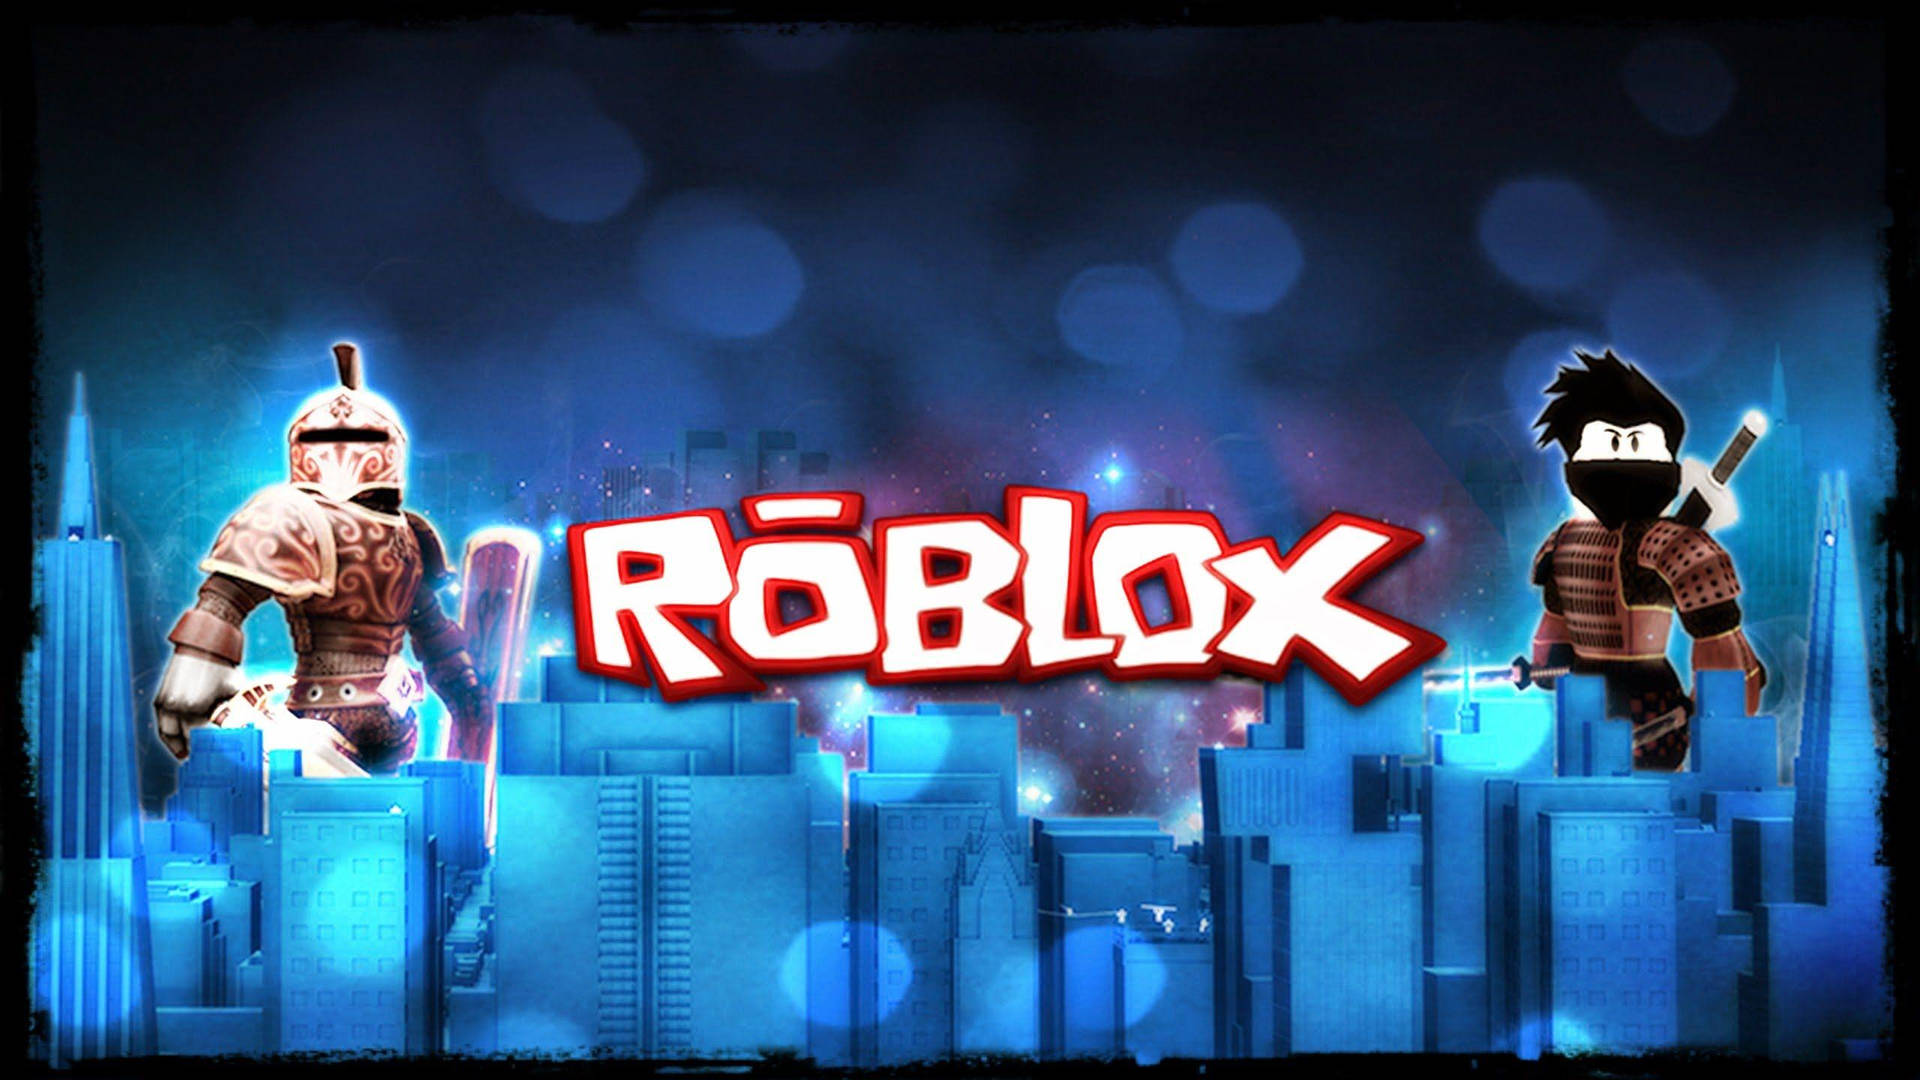 "Make Friends and Take the Fun Up a Notch with Cute Roblox!" Wallpaper